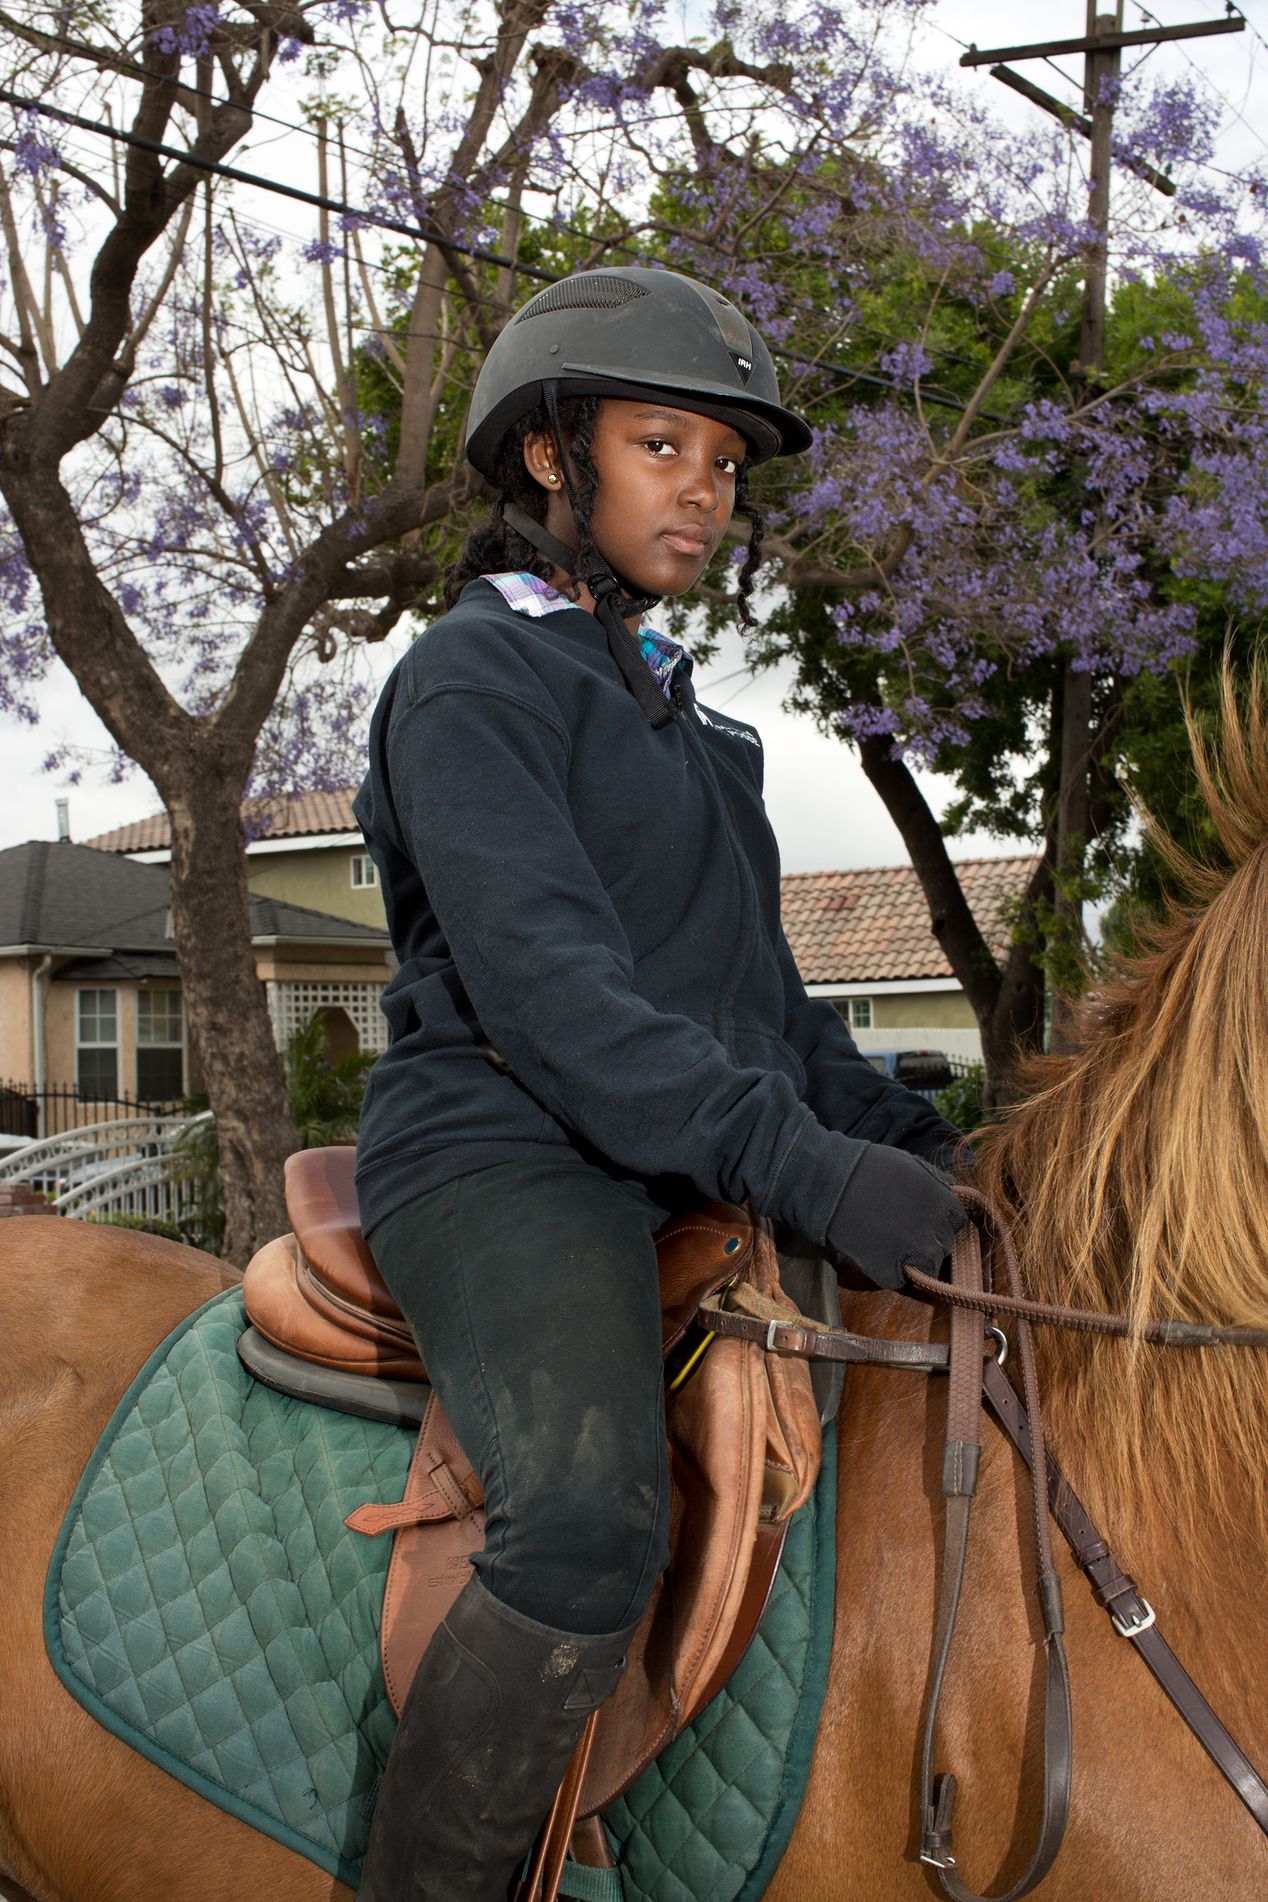 Young female equestrian on her horse, Ilona Szwarc, editorial photographer in Los Angeles.